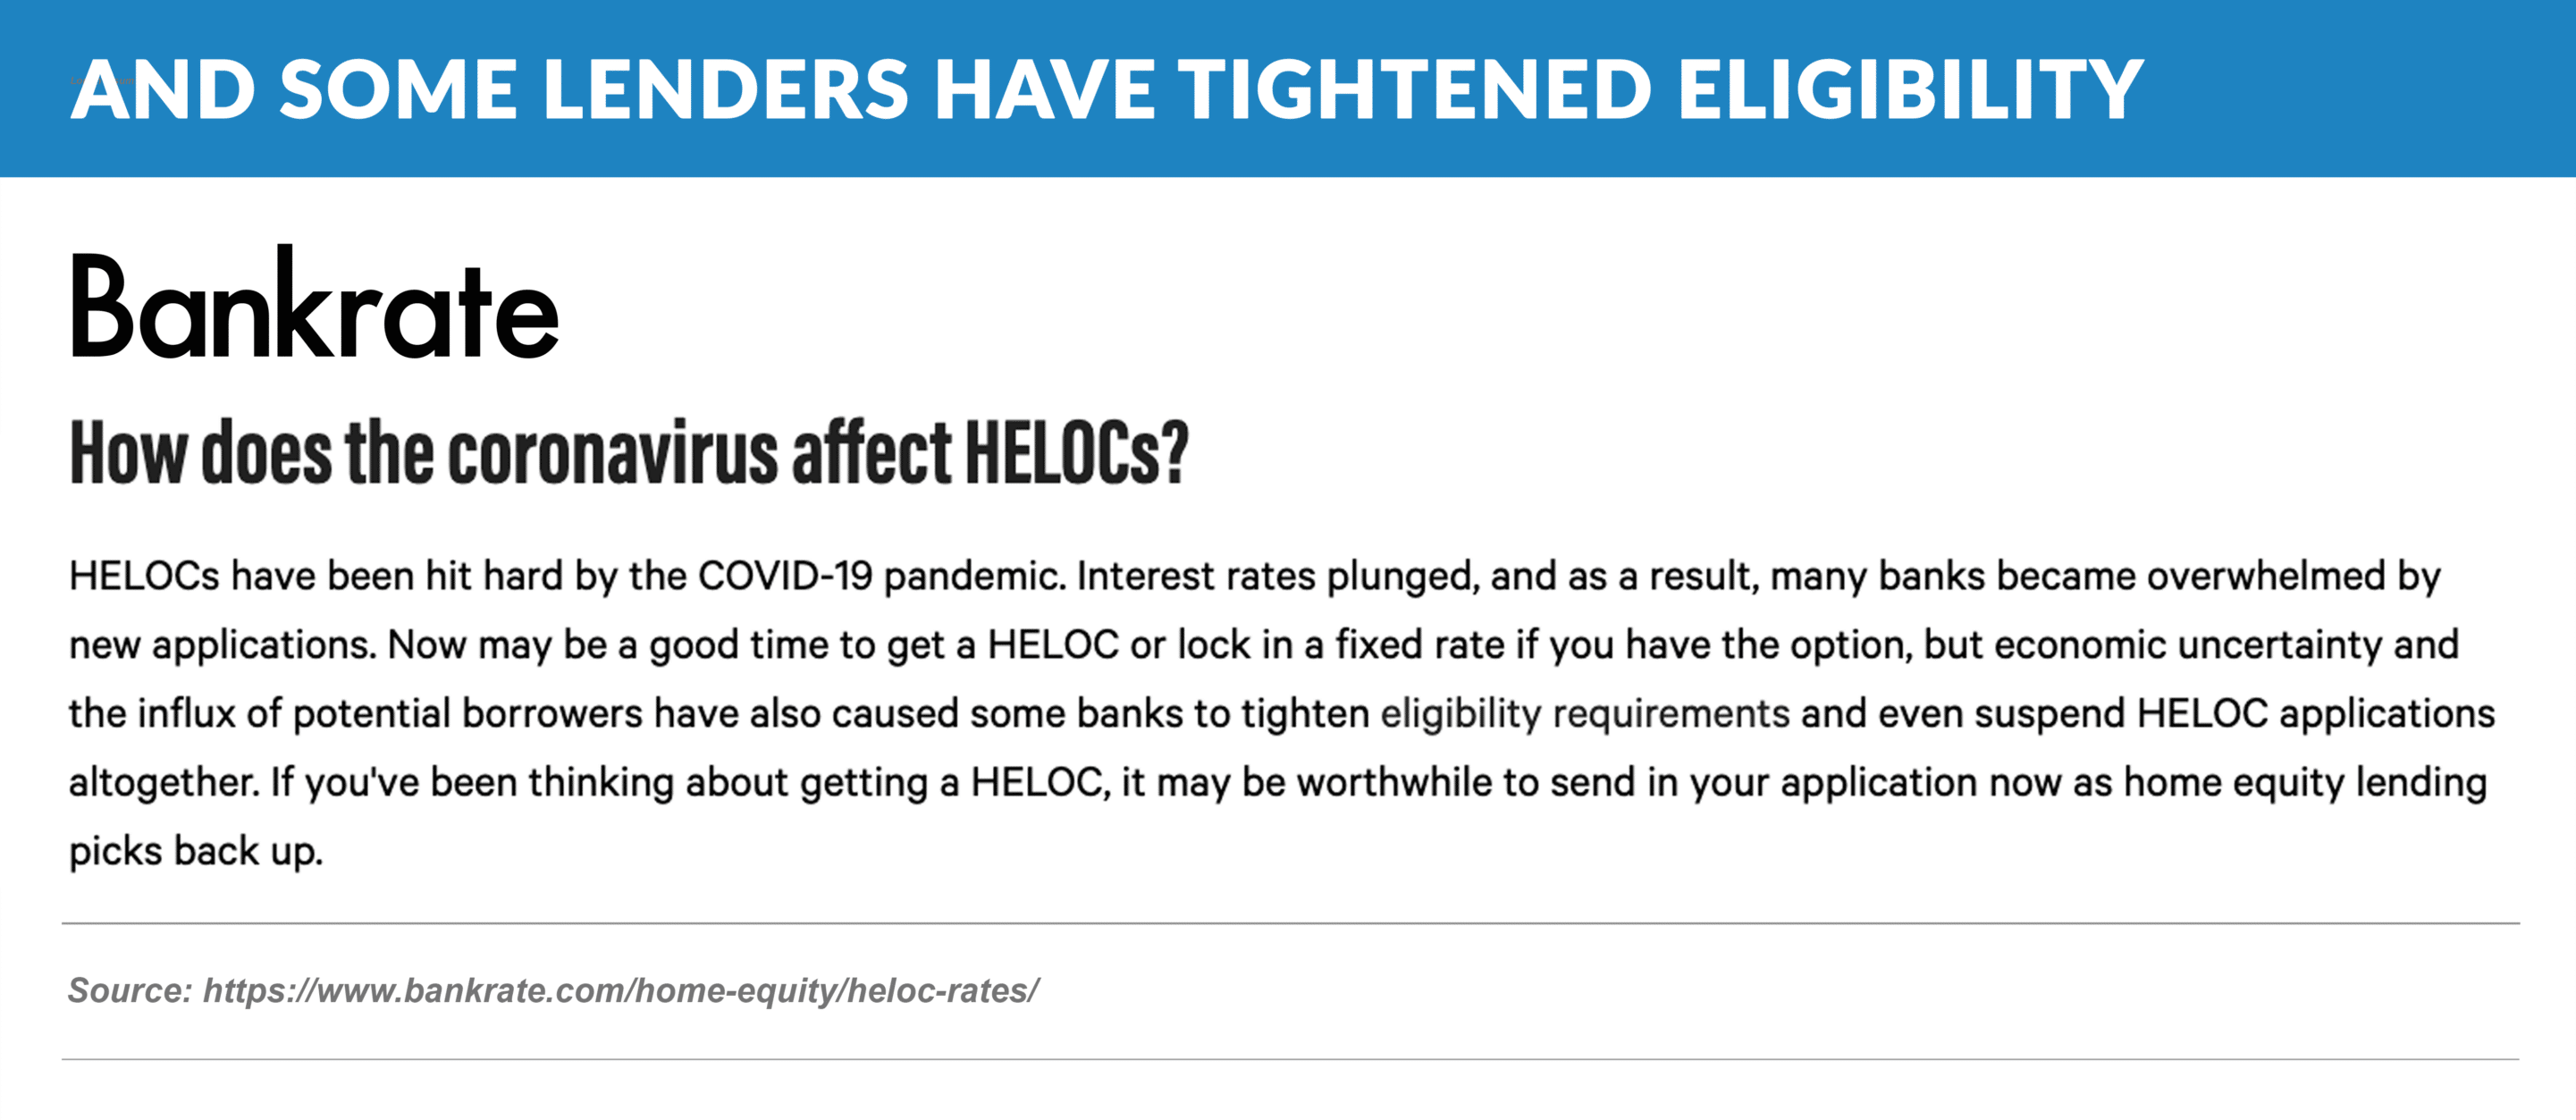 SOME LENDERS have tightened eligibility